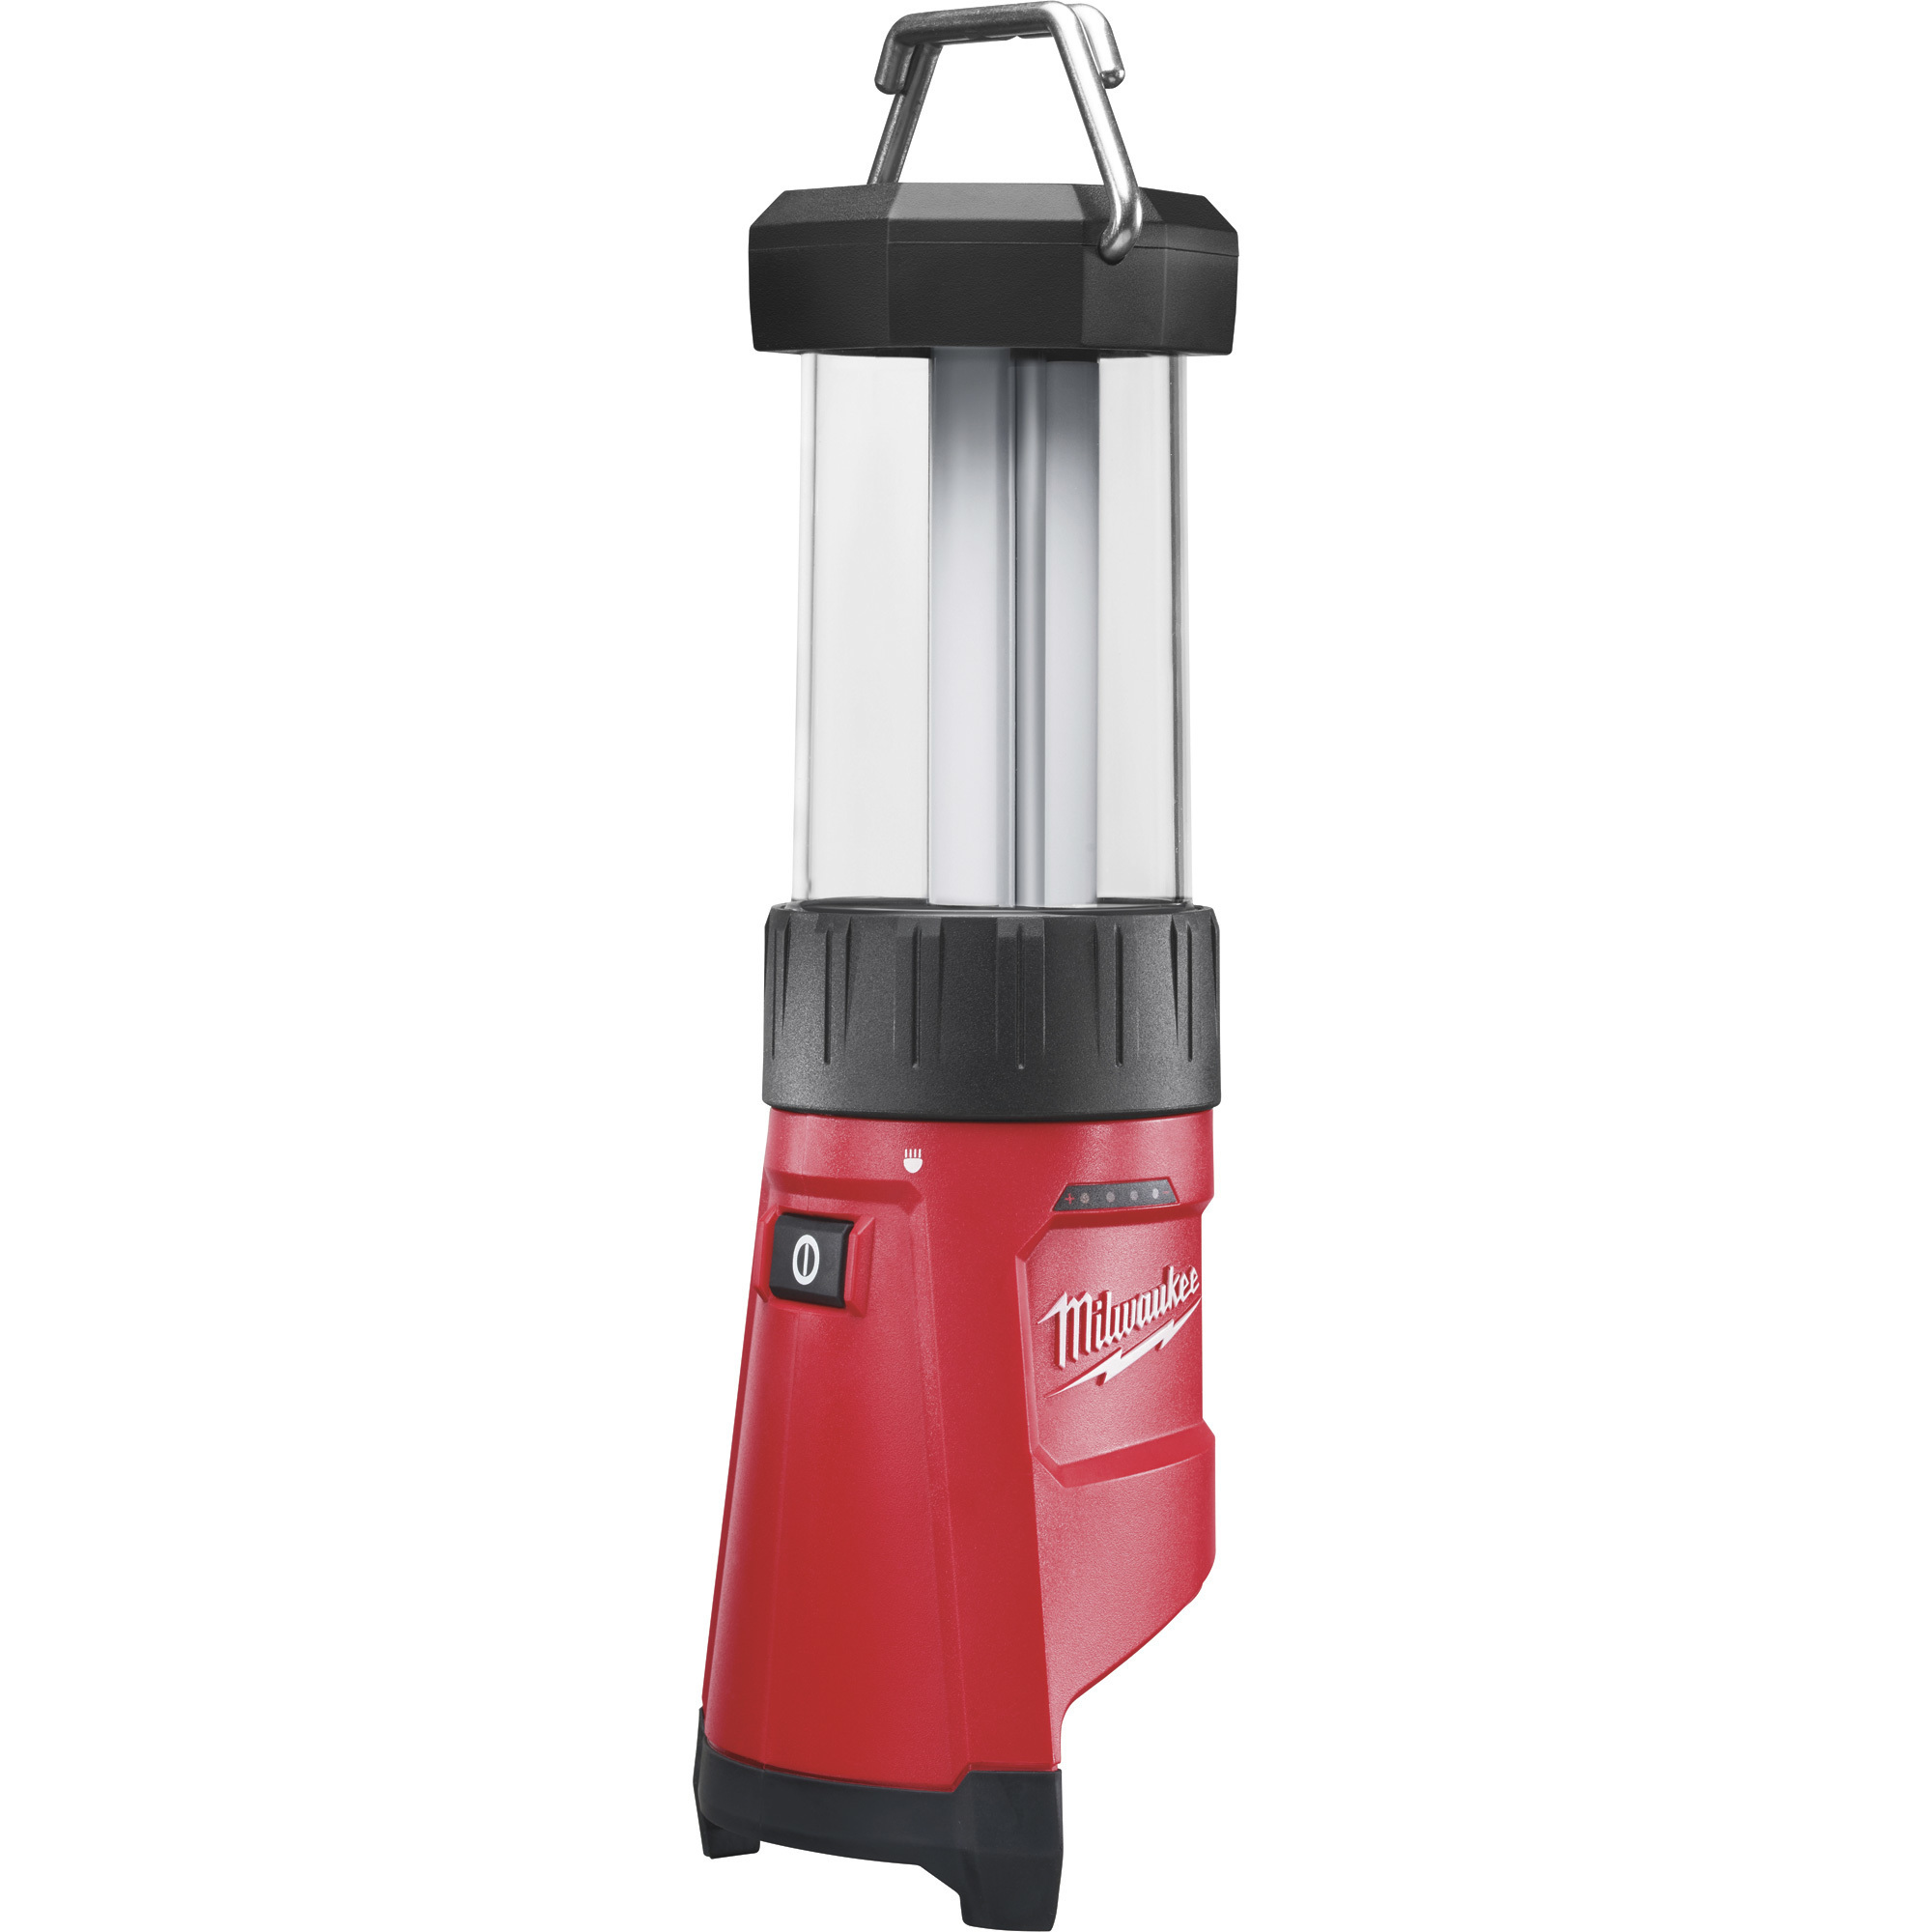 Milwaukee M12 LED Portable Work Flood Light/Lantern with Built-In USB Charger, 400 Lumens, Model 2362-20